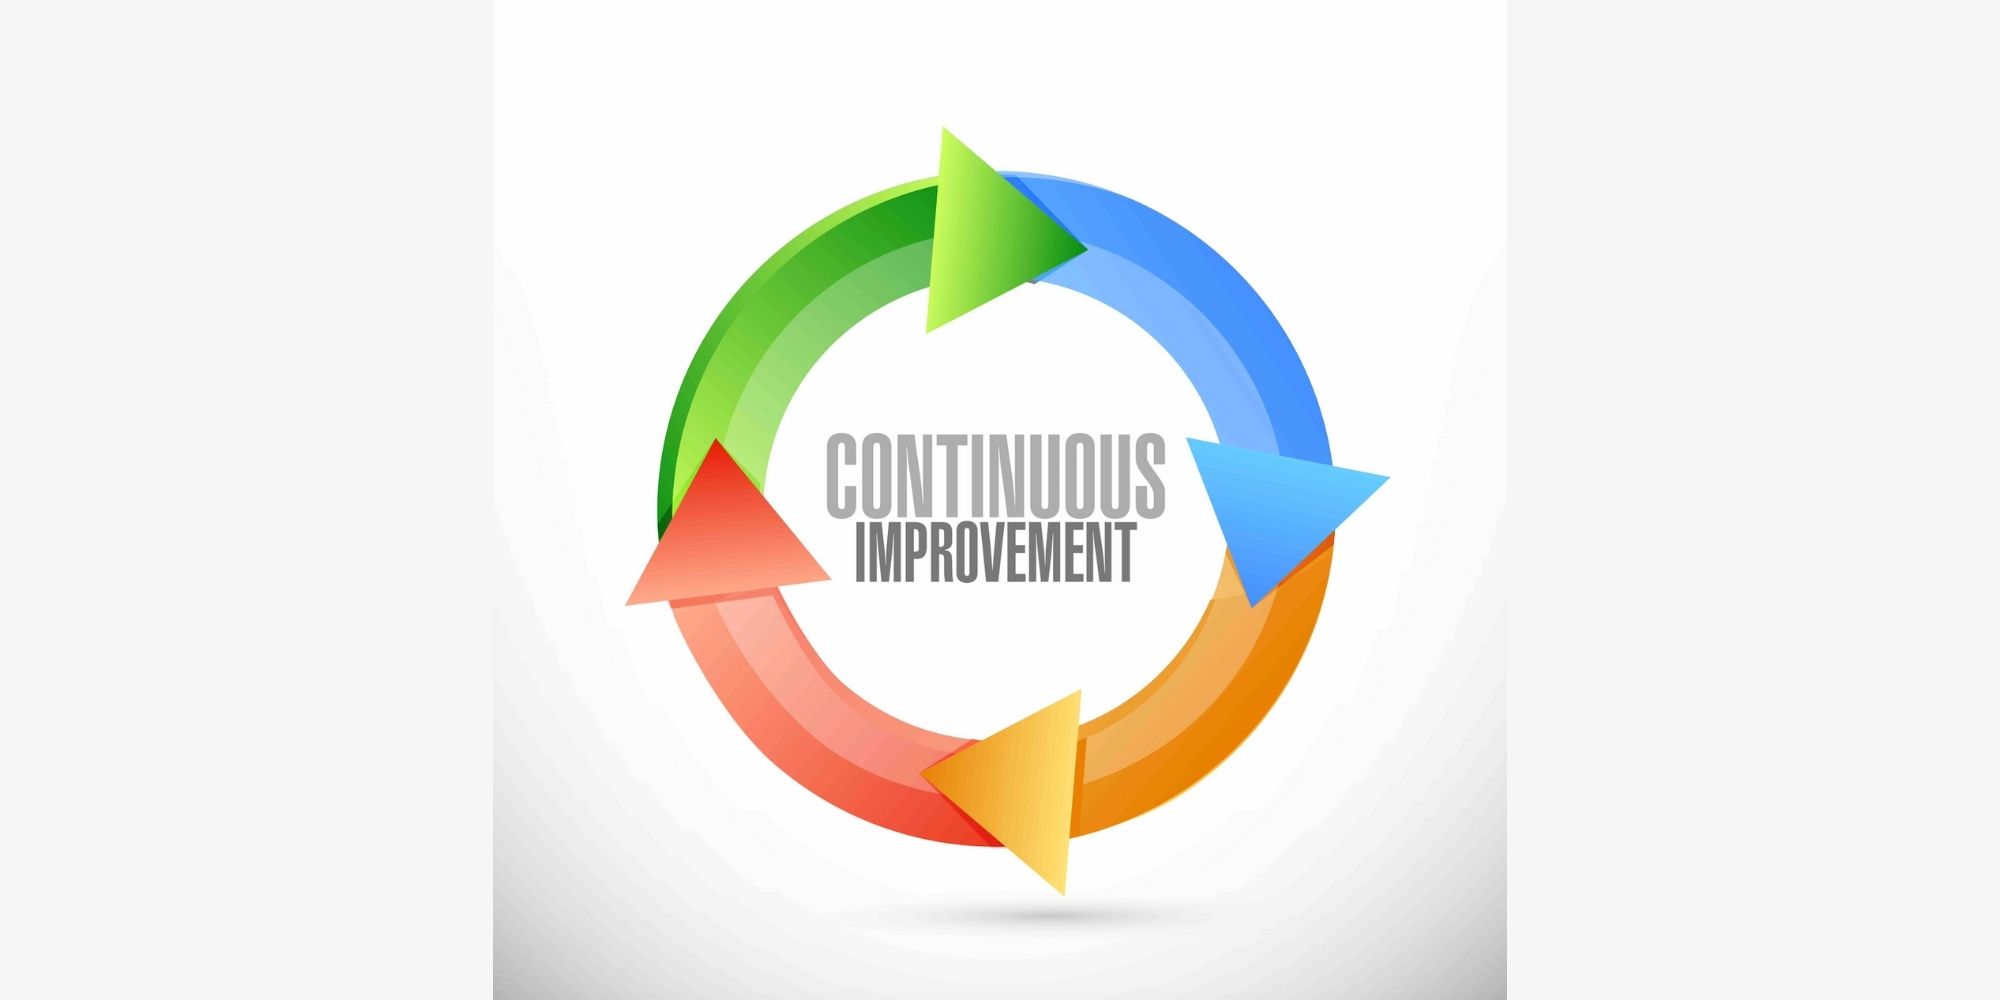 6 steps to continuous improvement for businesses